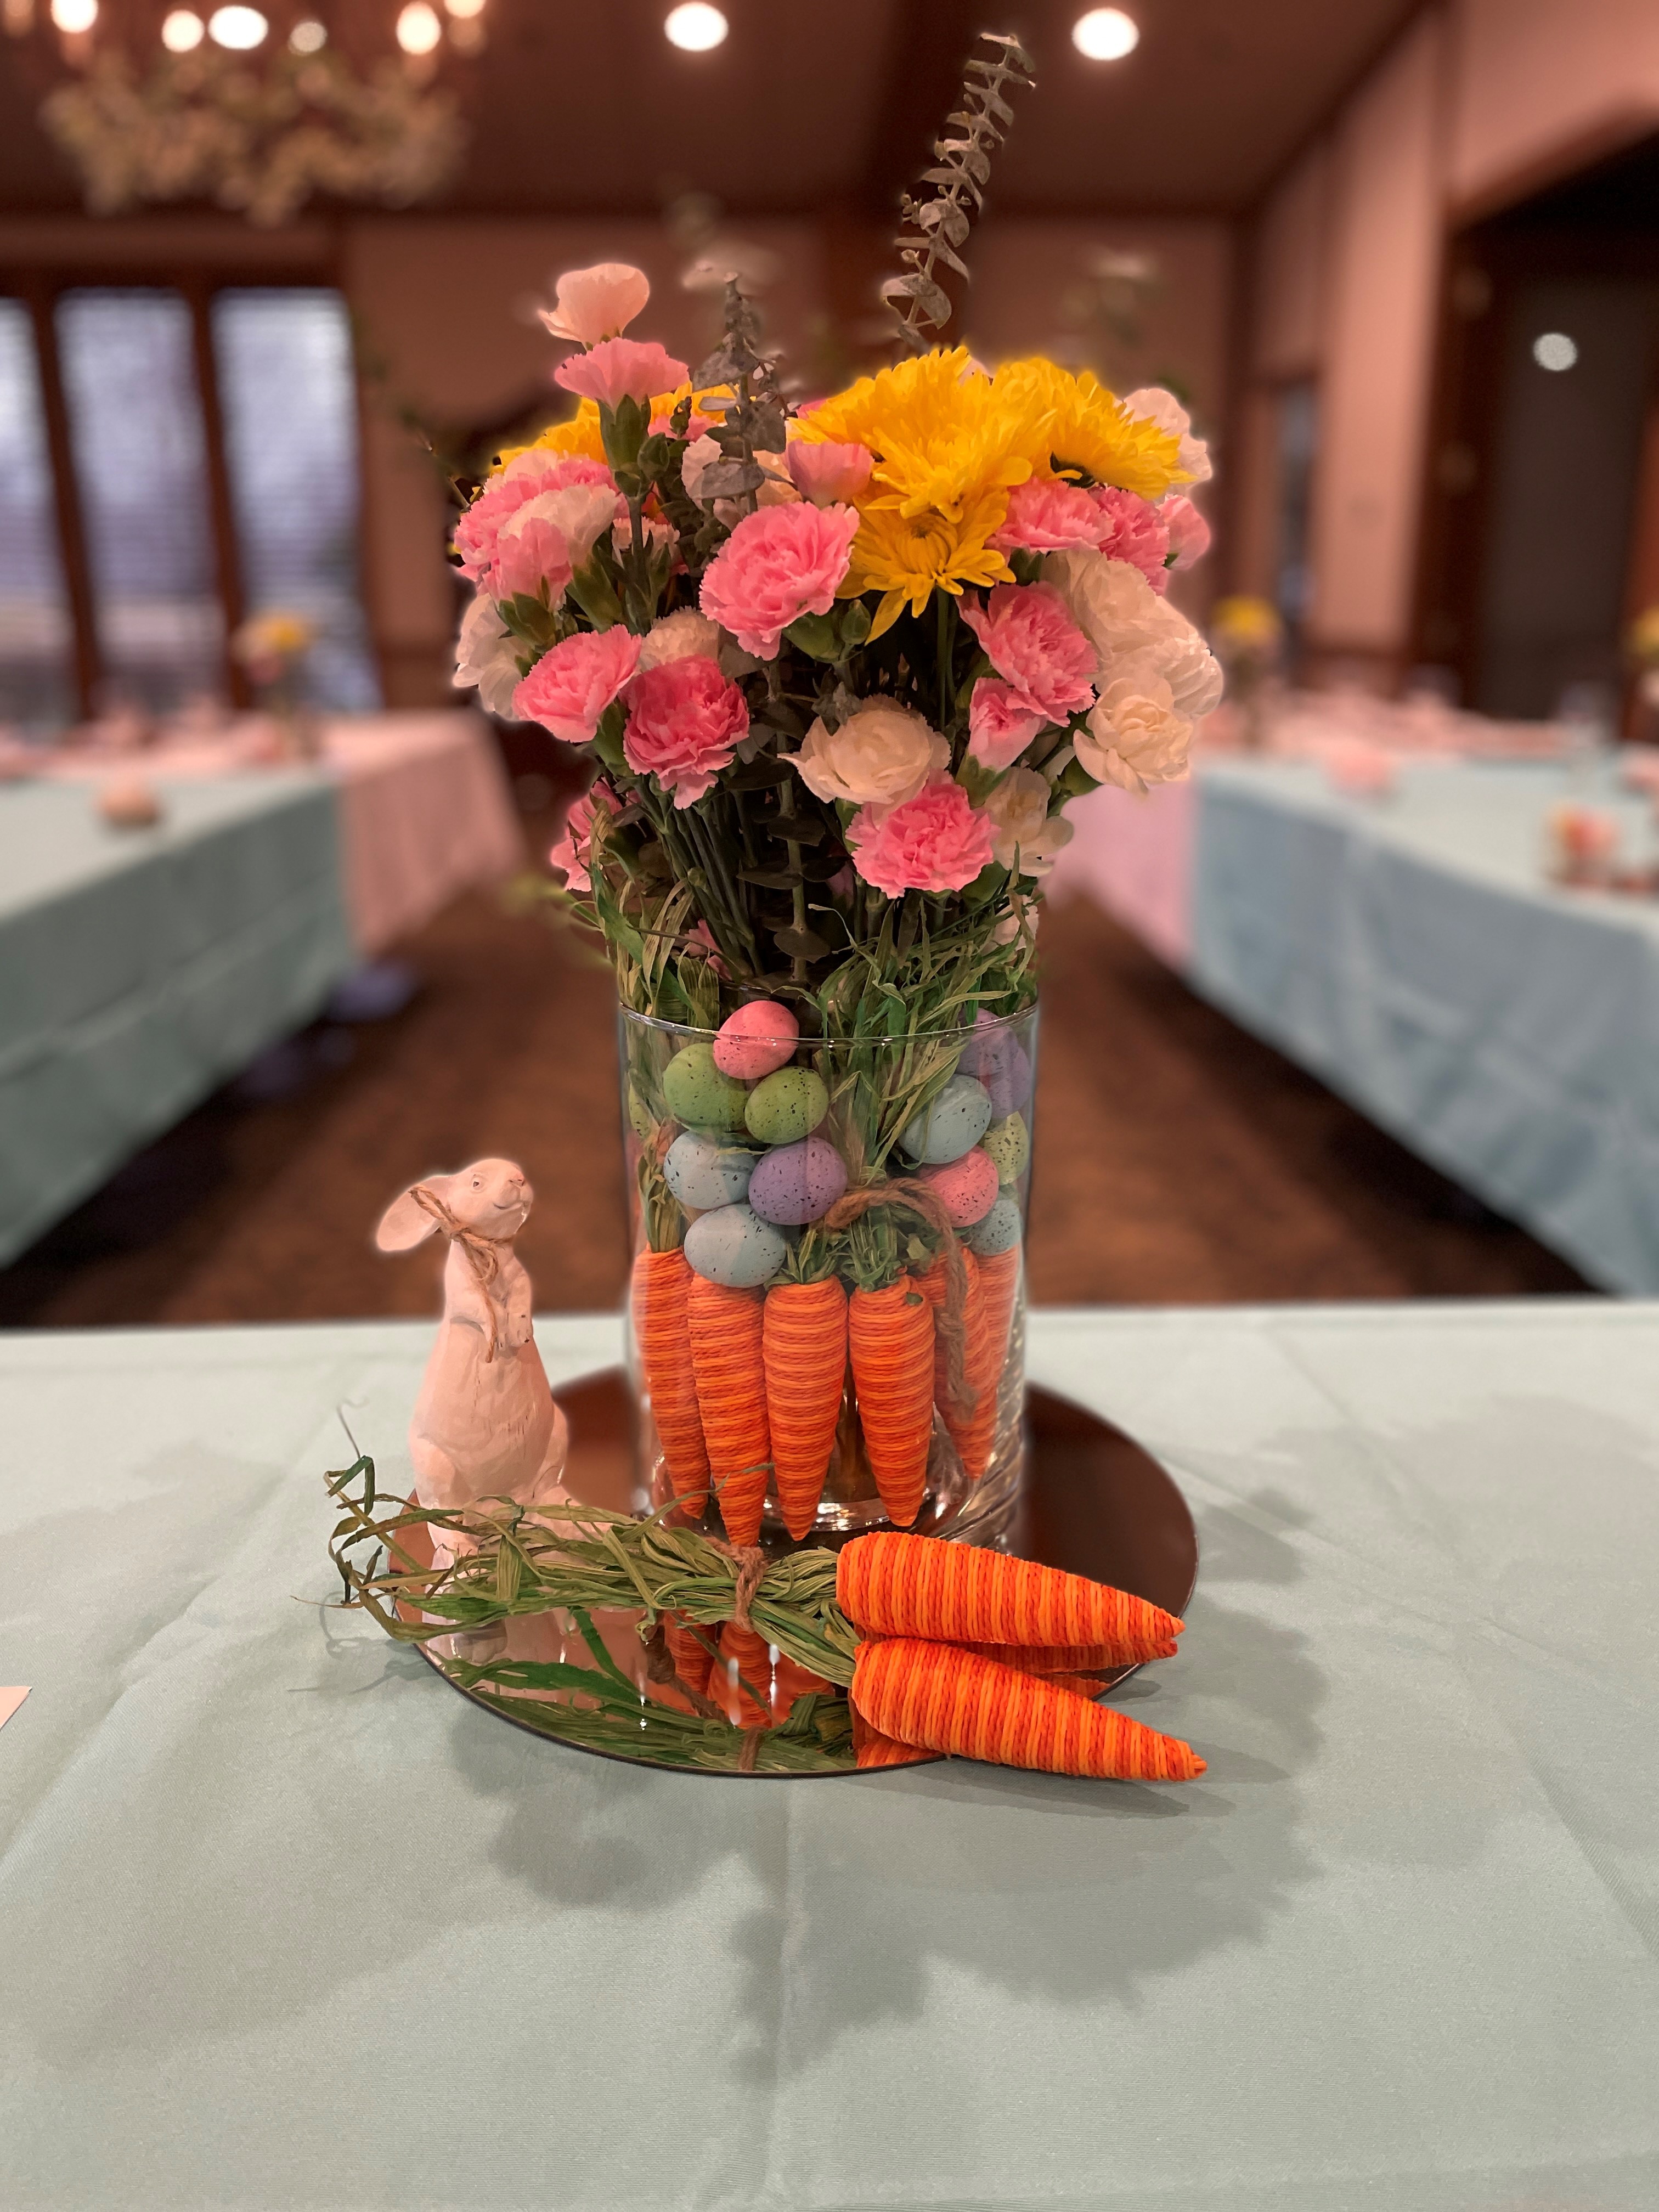 2022 Spring Fling centerpiece and tables